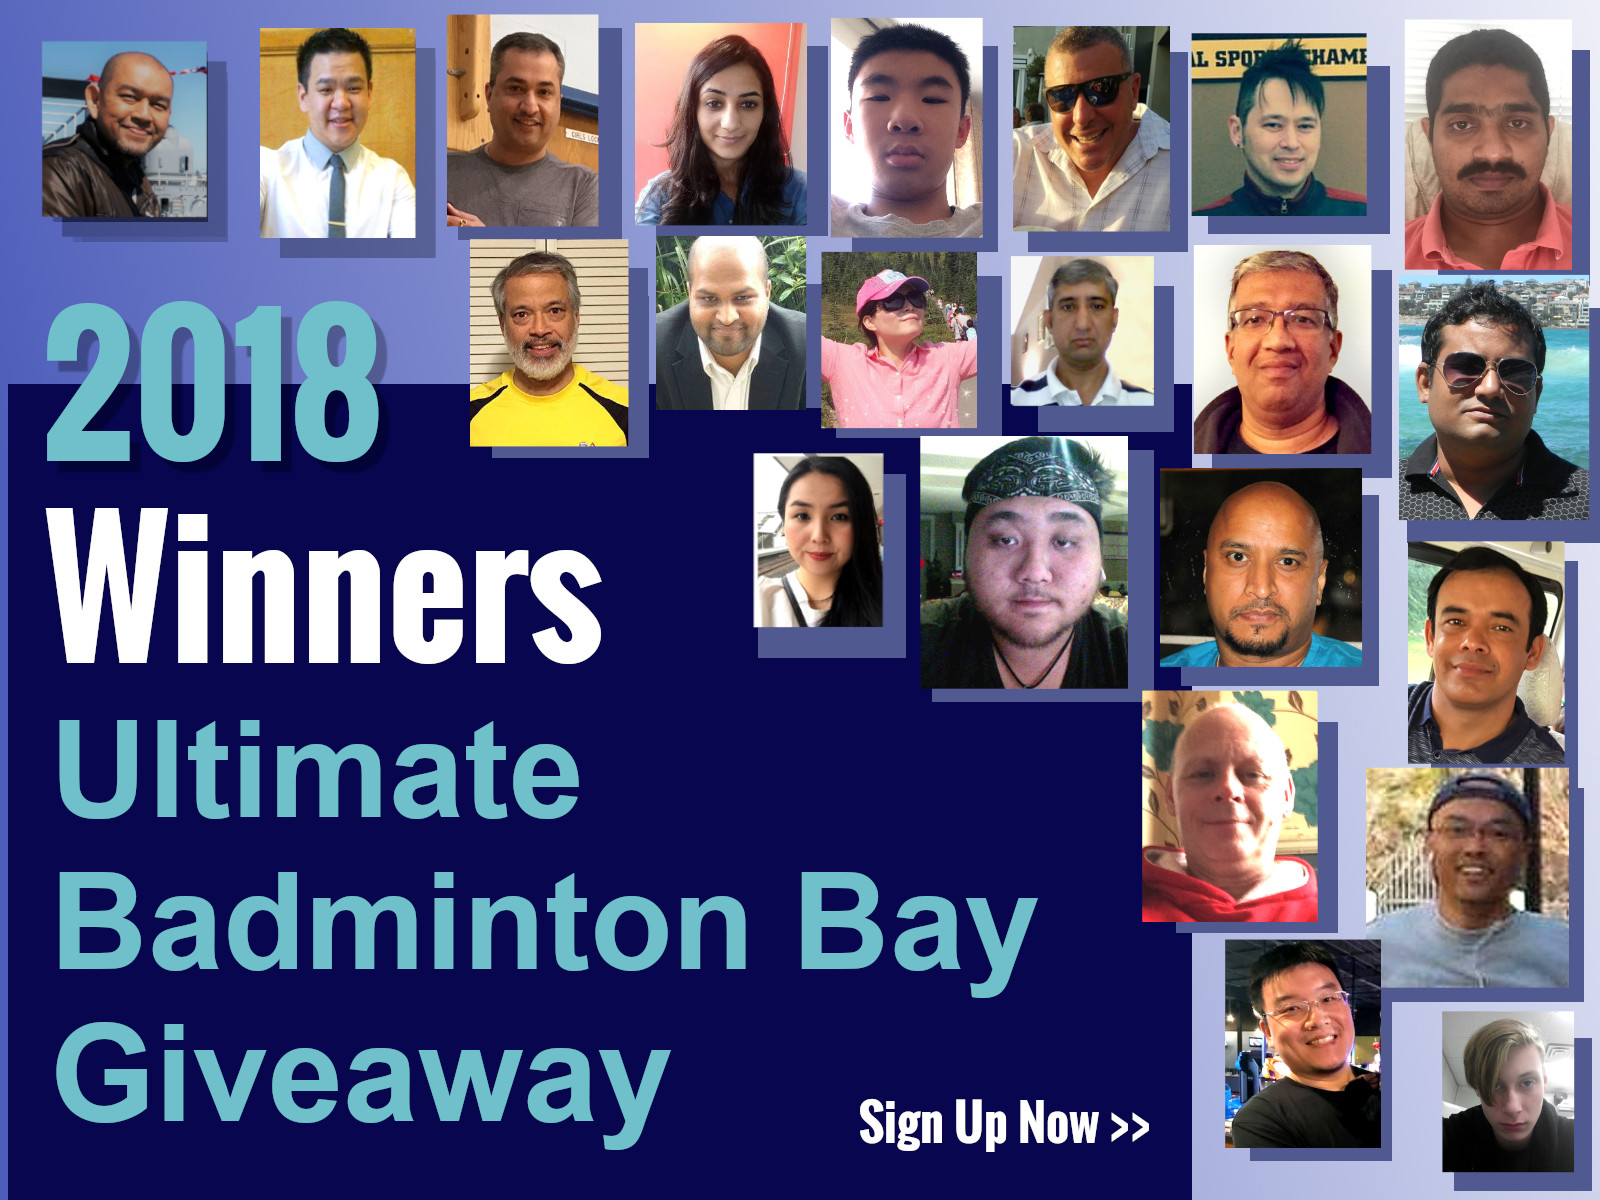 2018 Winners Ultimate Badminton Bay Giveaway - Sign up now>>